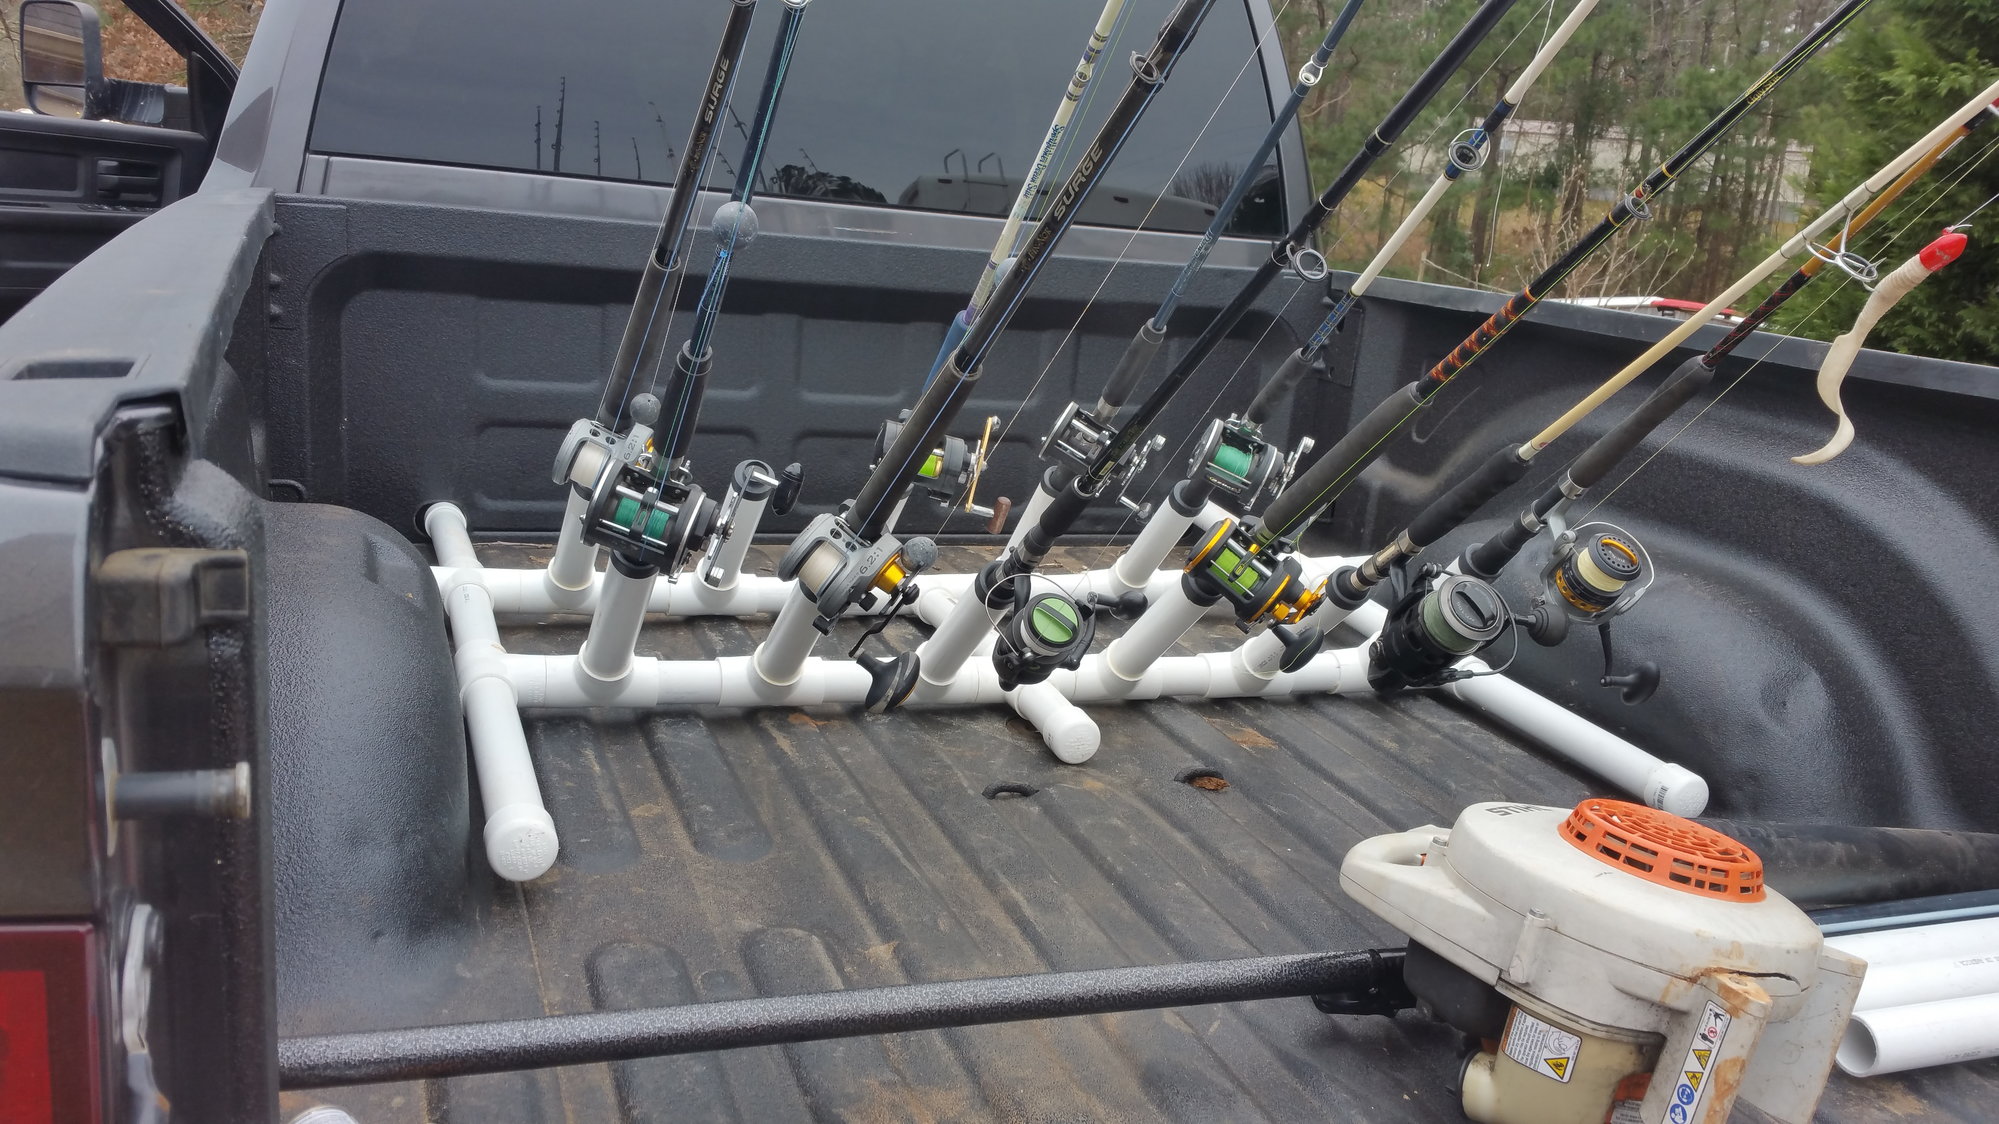 Truck bed rod holder setups - Page 2 - The Hull Truth - Boating